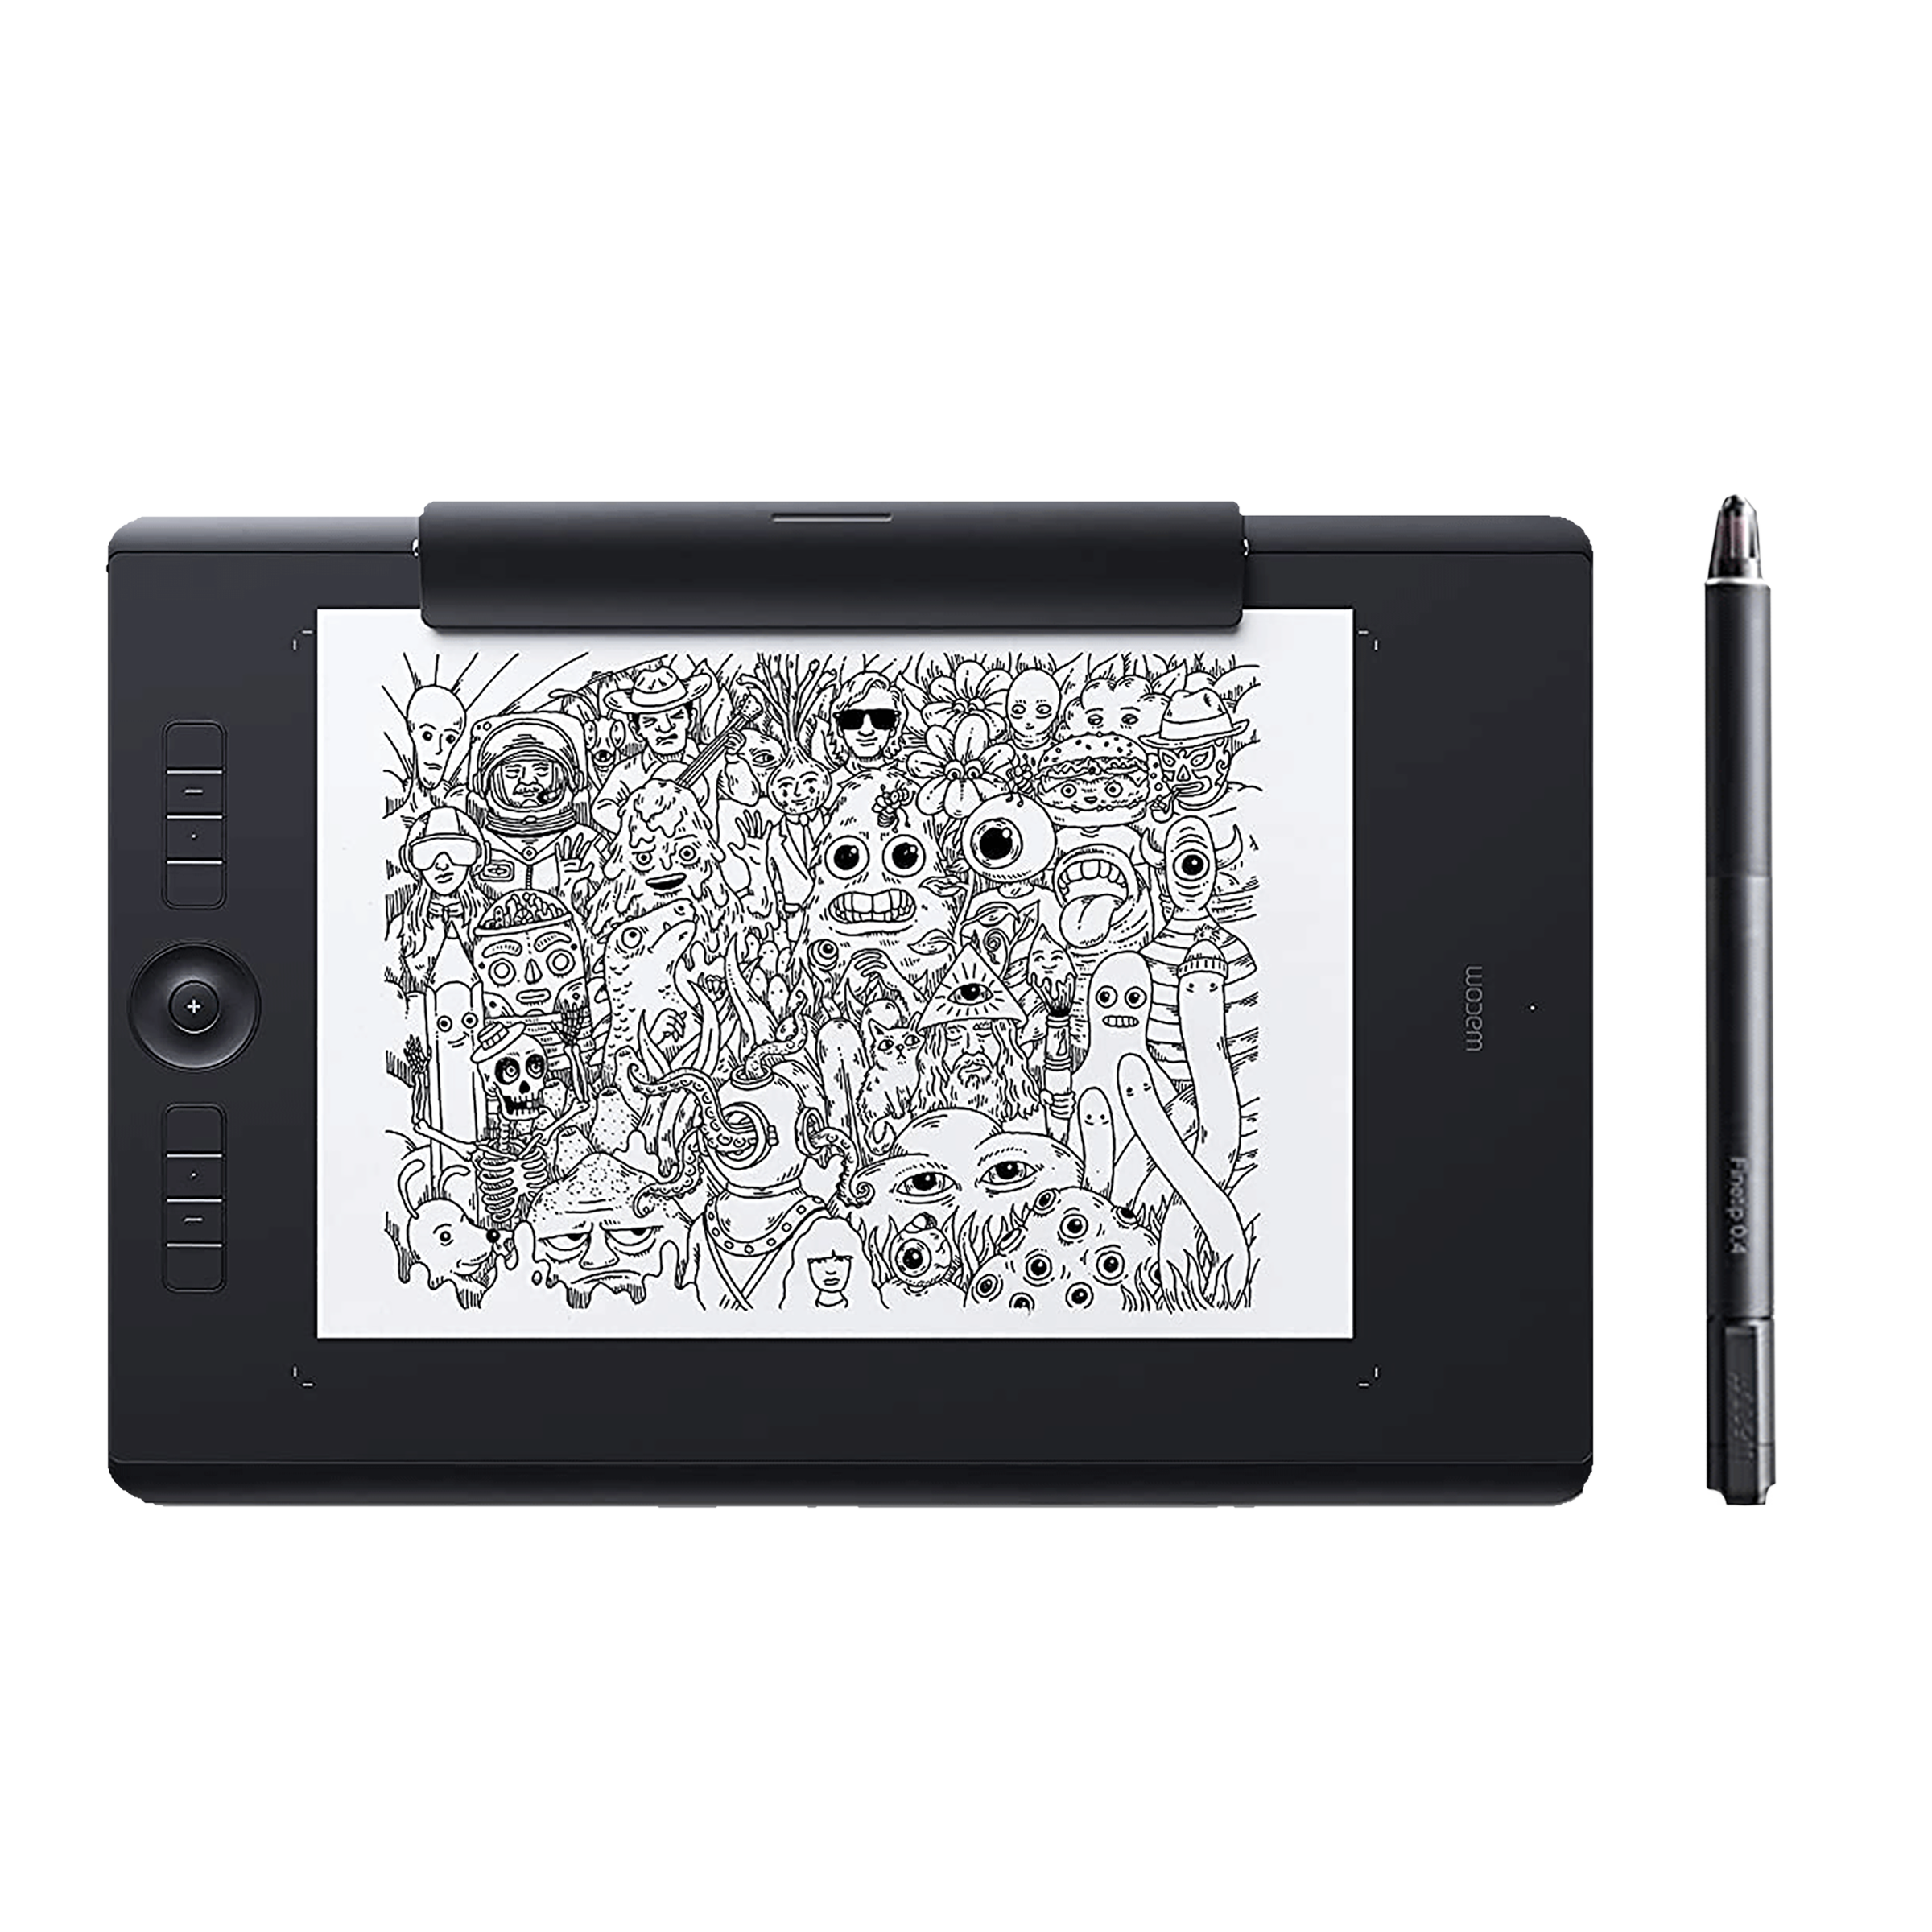 Wacom Intuos Pro Large Android Tablet (12.1 Inch, Black)